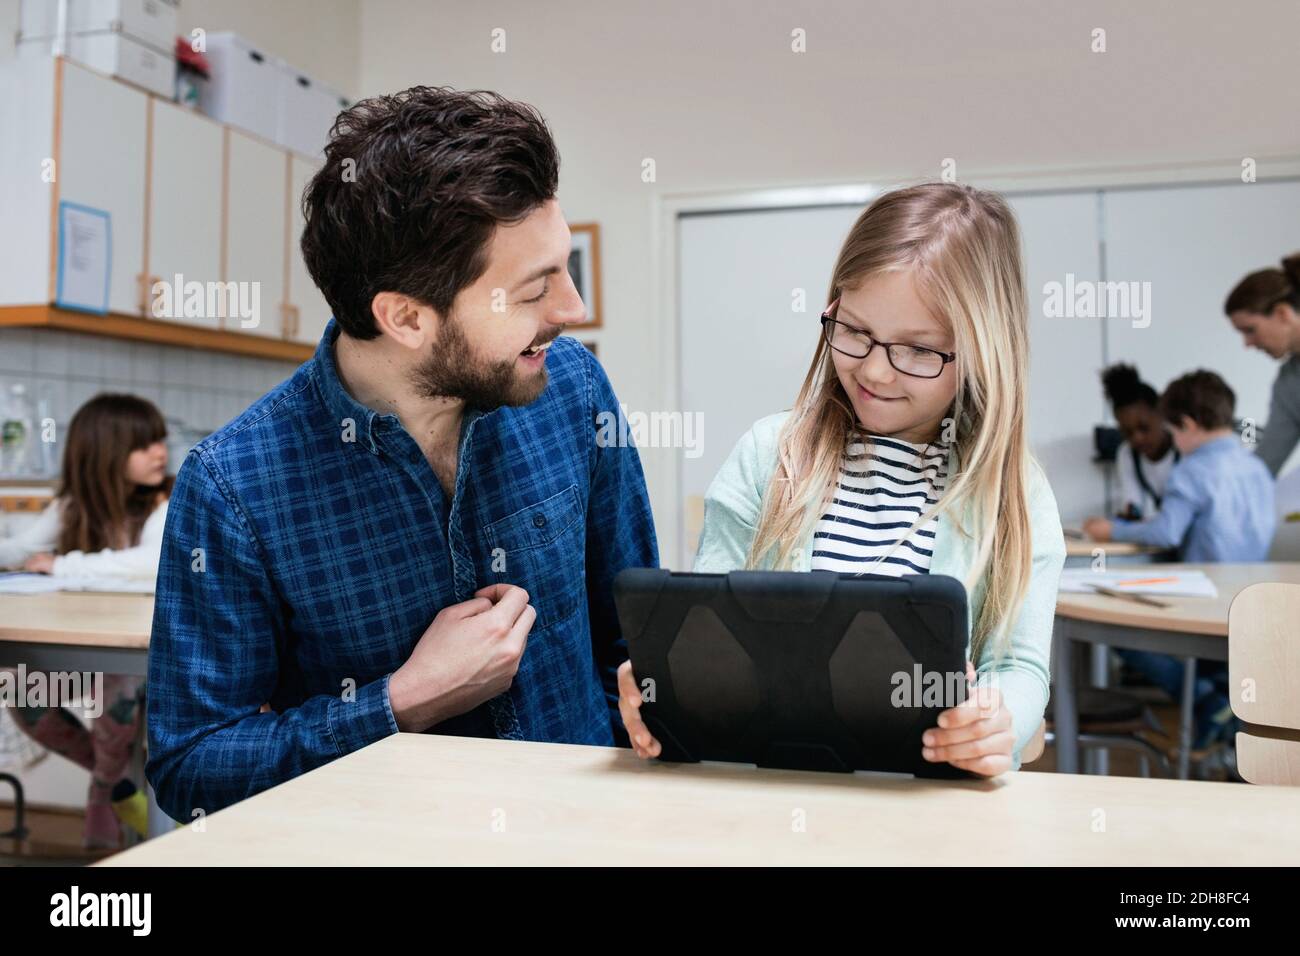 Smiling teacher looking at girl holding digital tablet at desk Stock Photo